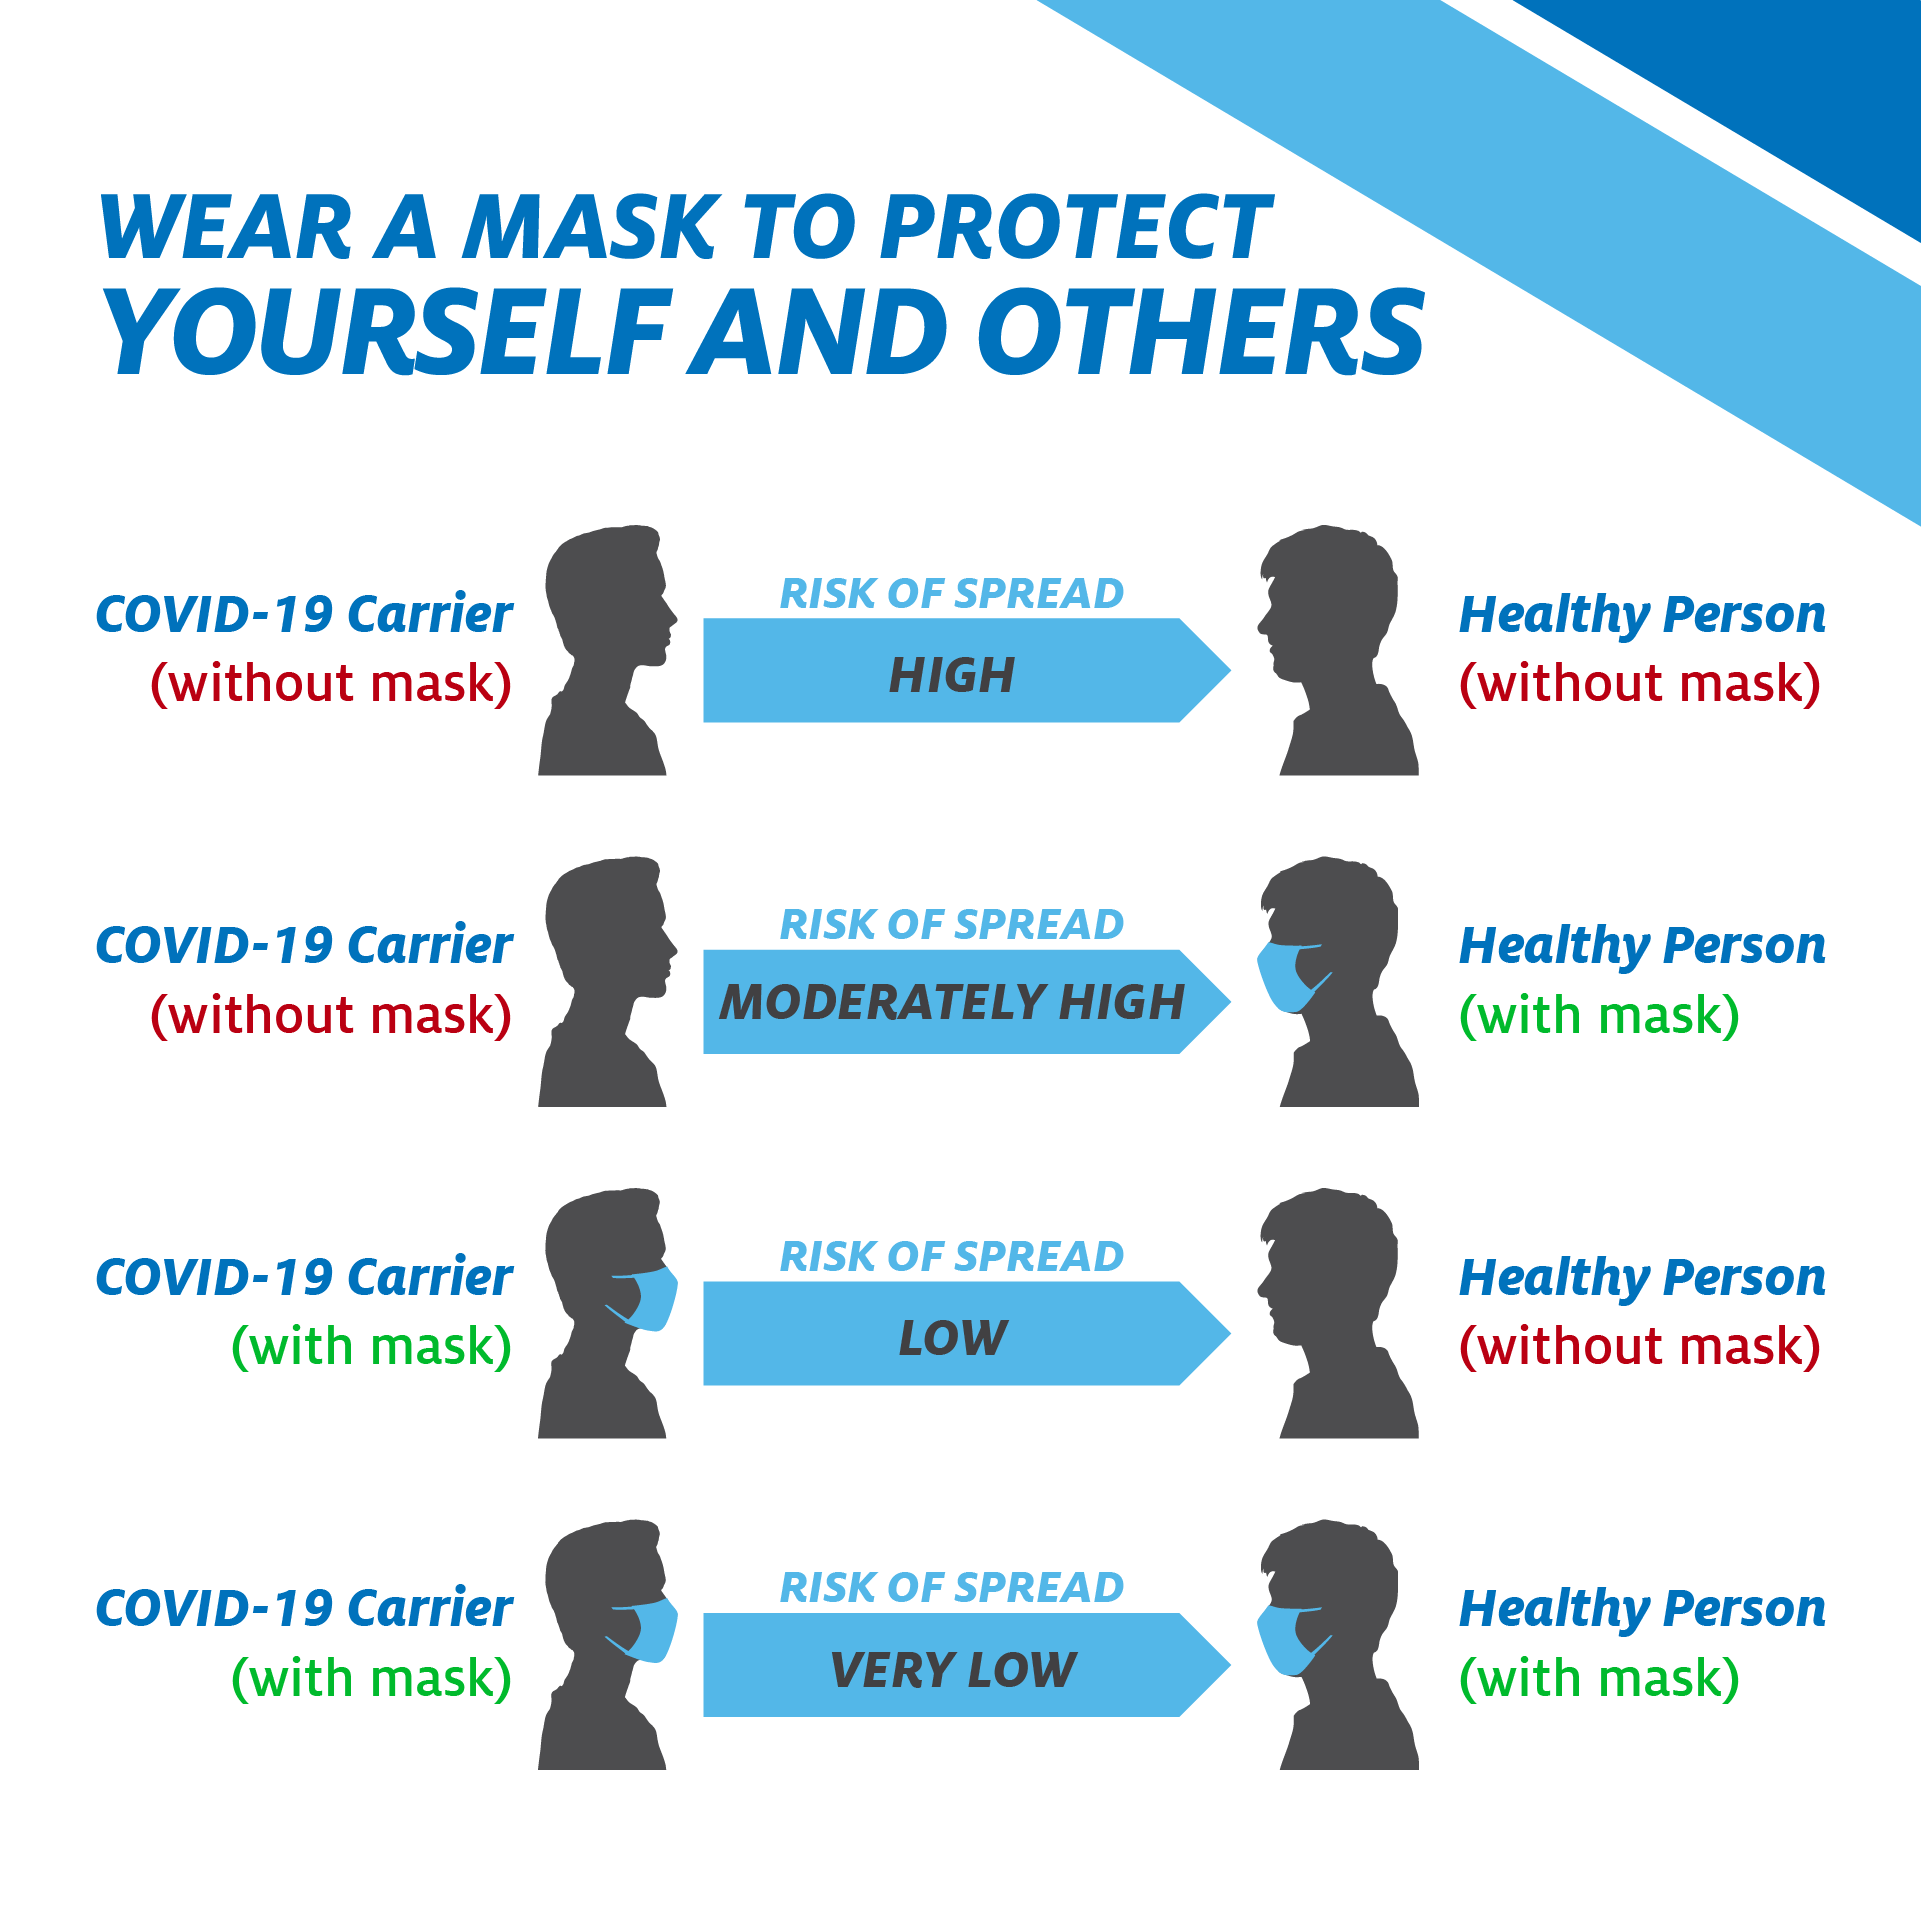 wear-a-mask-to-protect-yourself--others_social-media.png